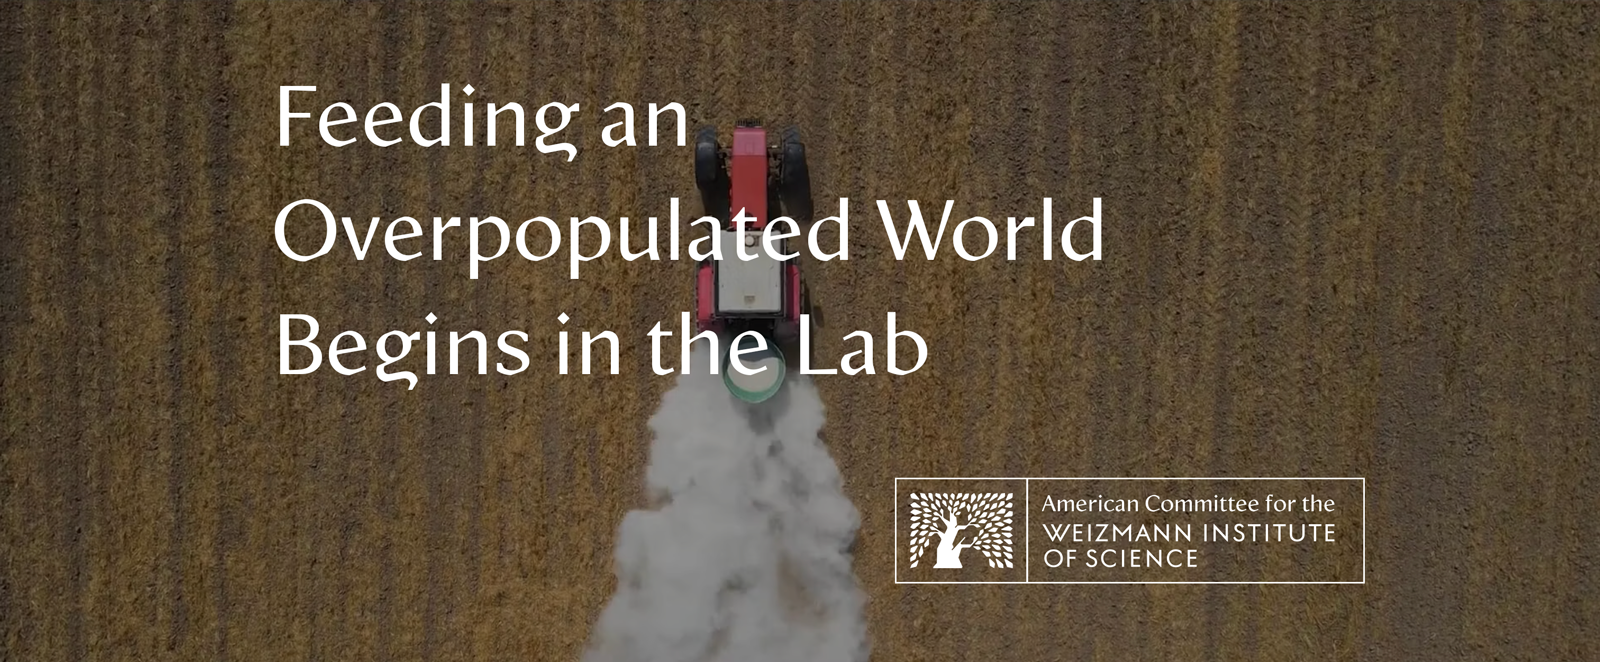 Feeding an Overpopulated World Begins in the Lab